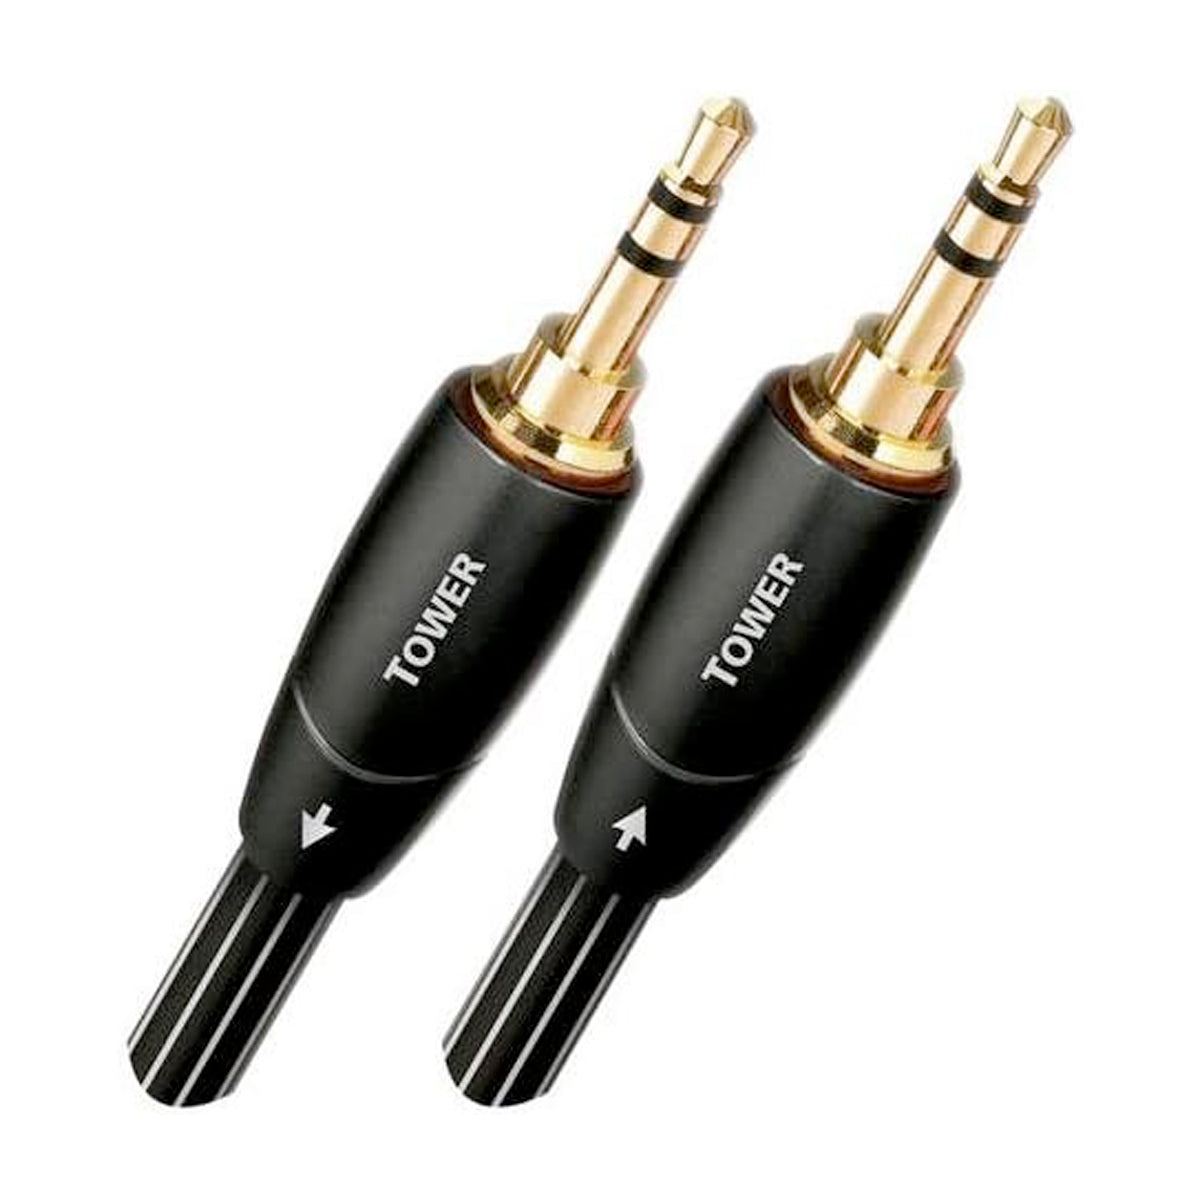 Audioquest RCA 3.5mm Interconnect Cables - TOWER